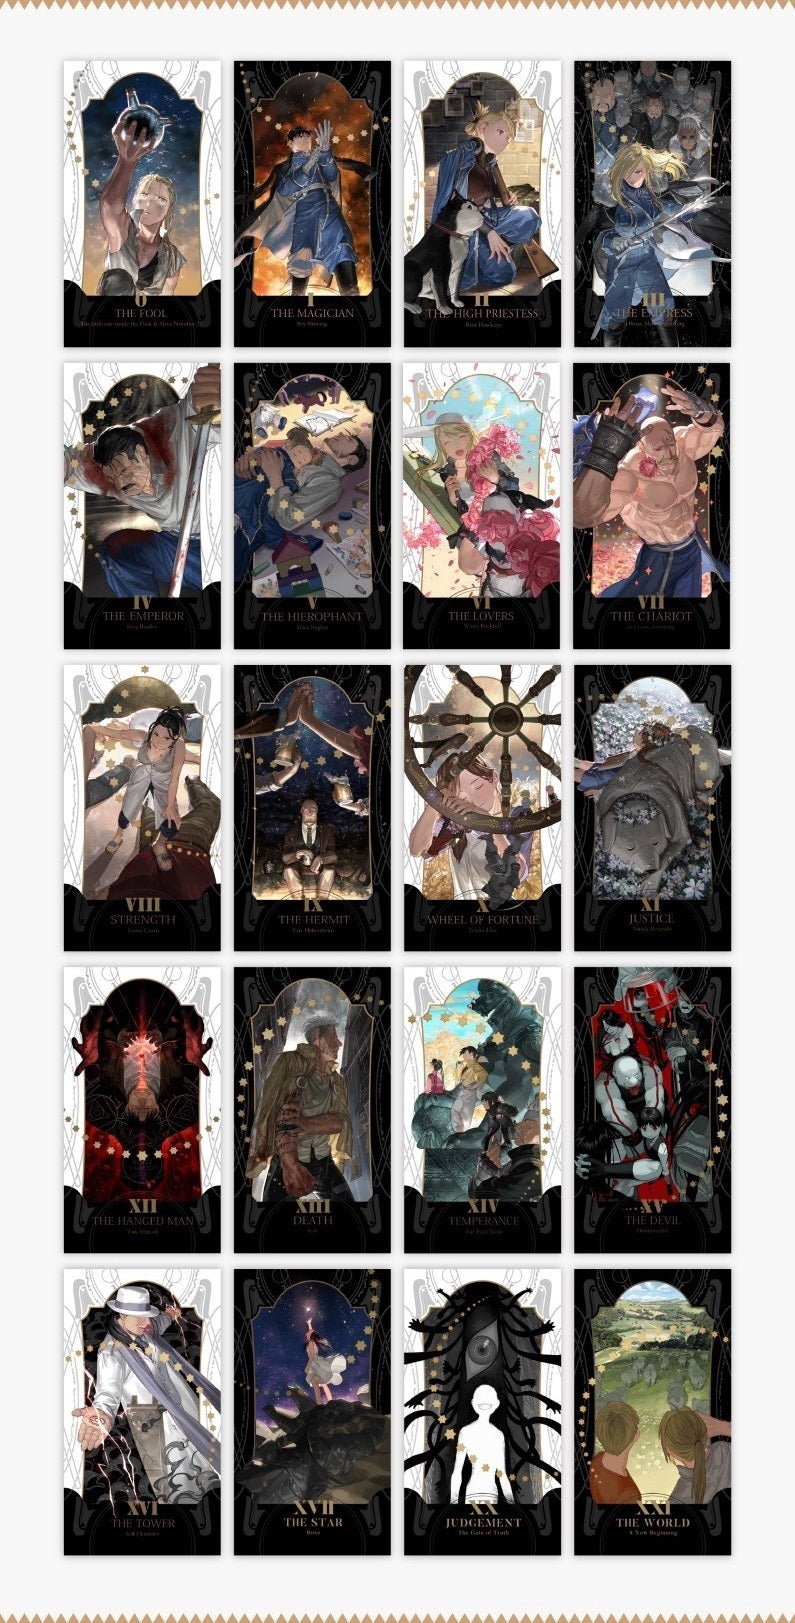 Fullmetal Alchemist "The Whirling Ways of Stars that Pass" Large Arcana Tarot Cards